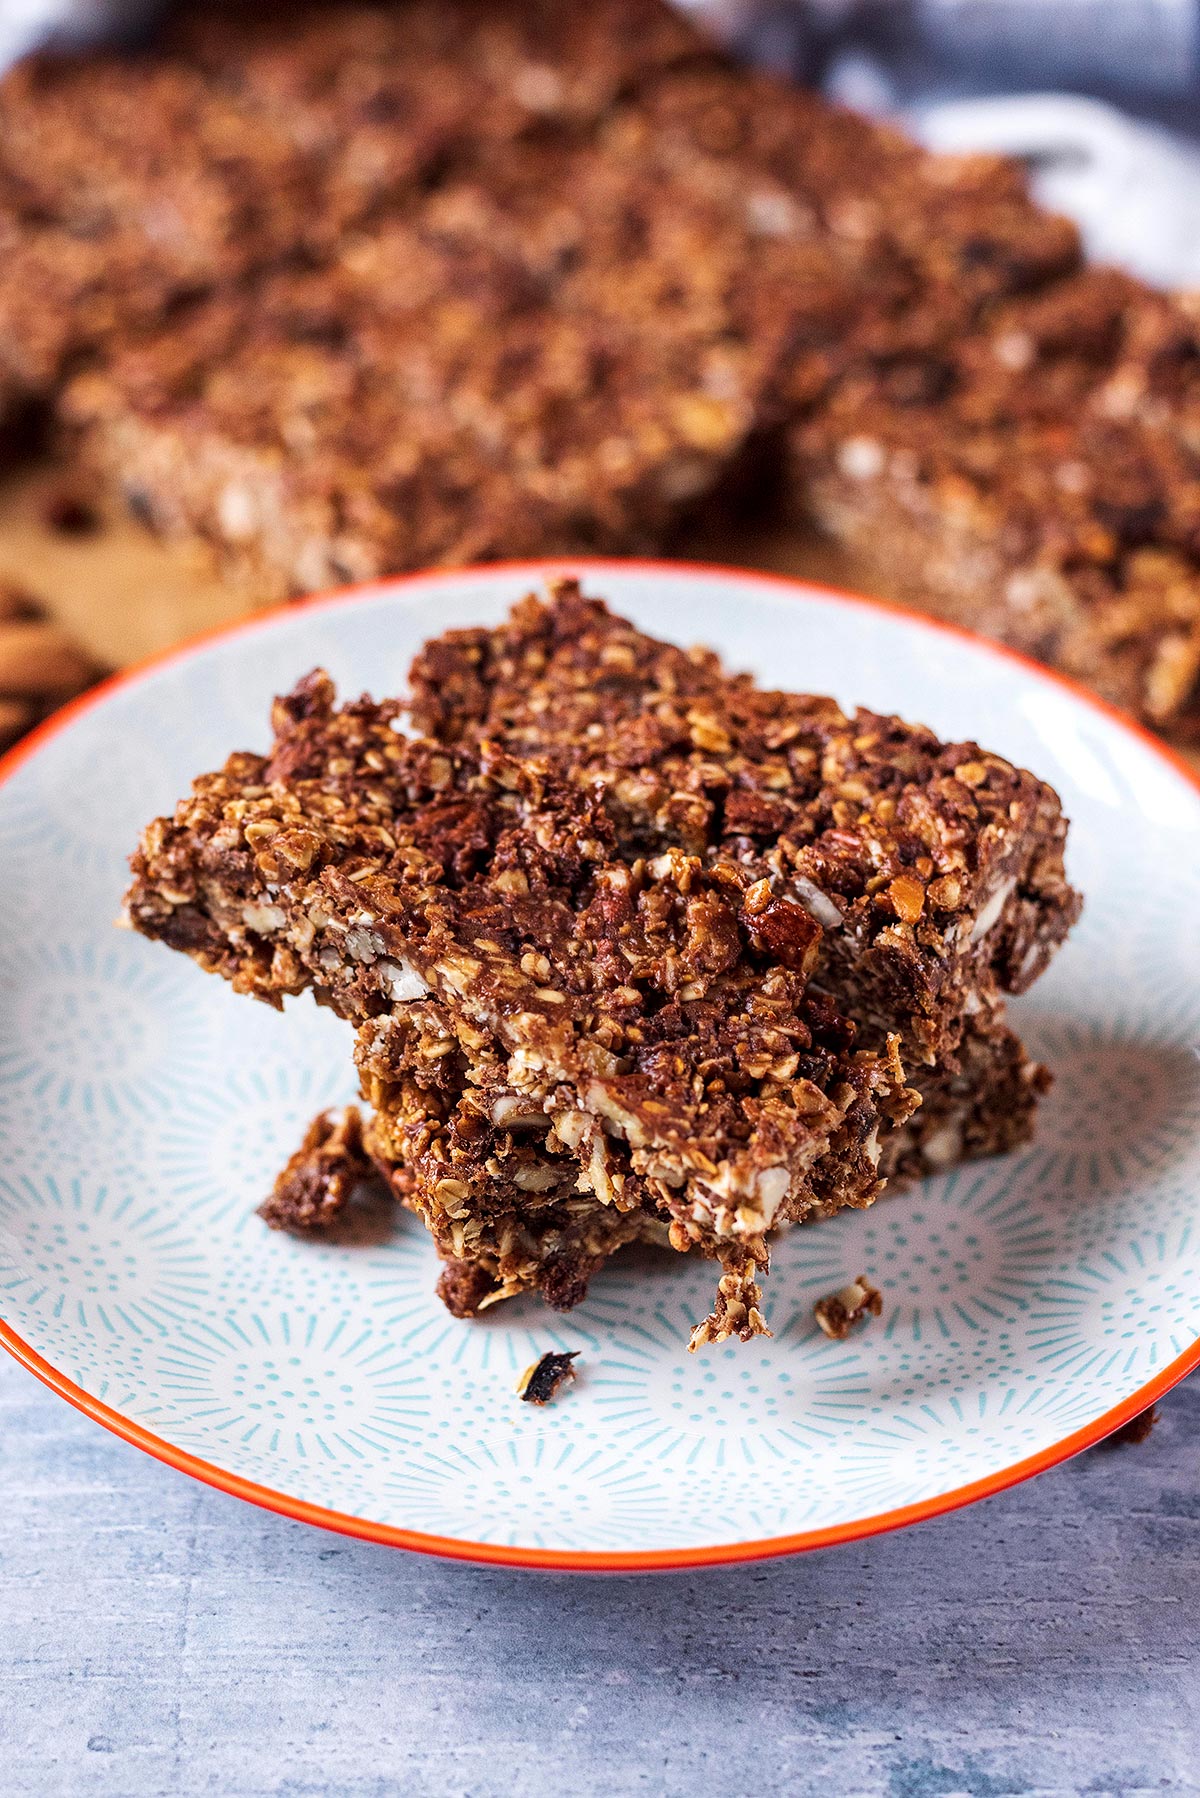 Granola bars on a plate with more bars in the background.